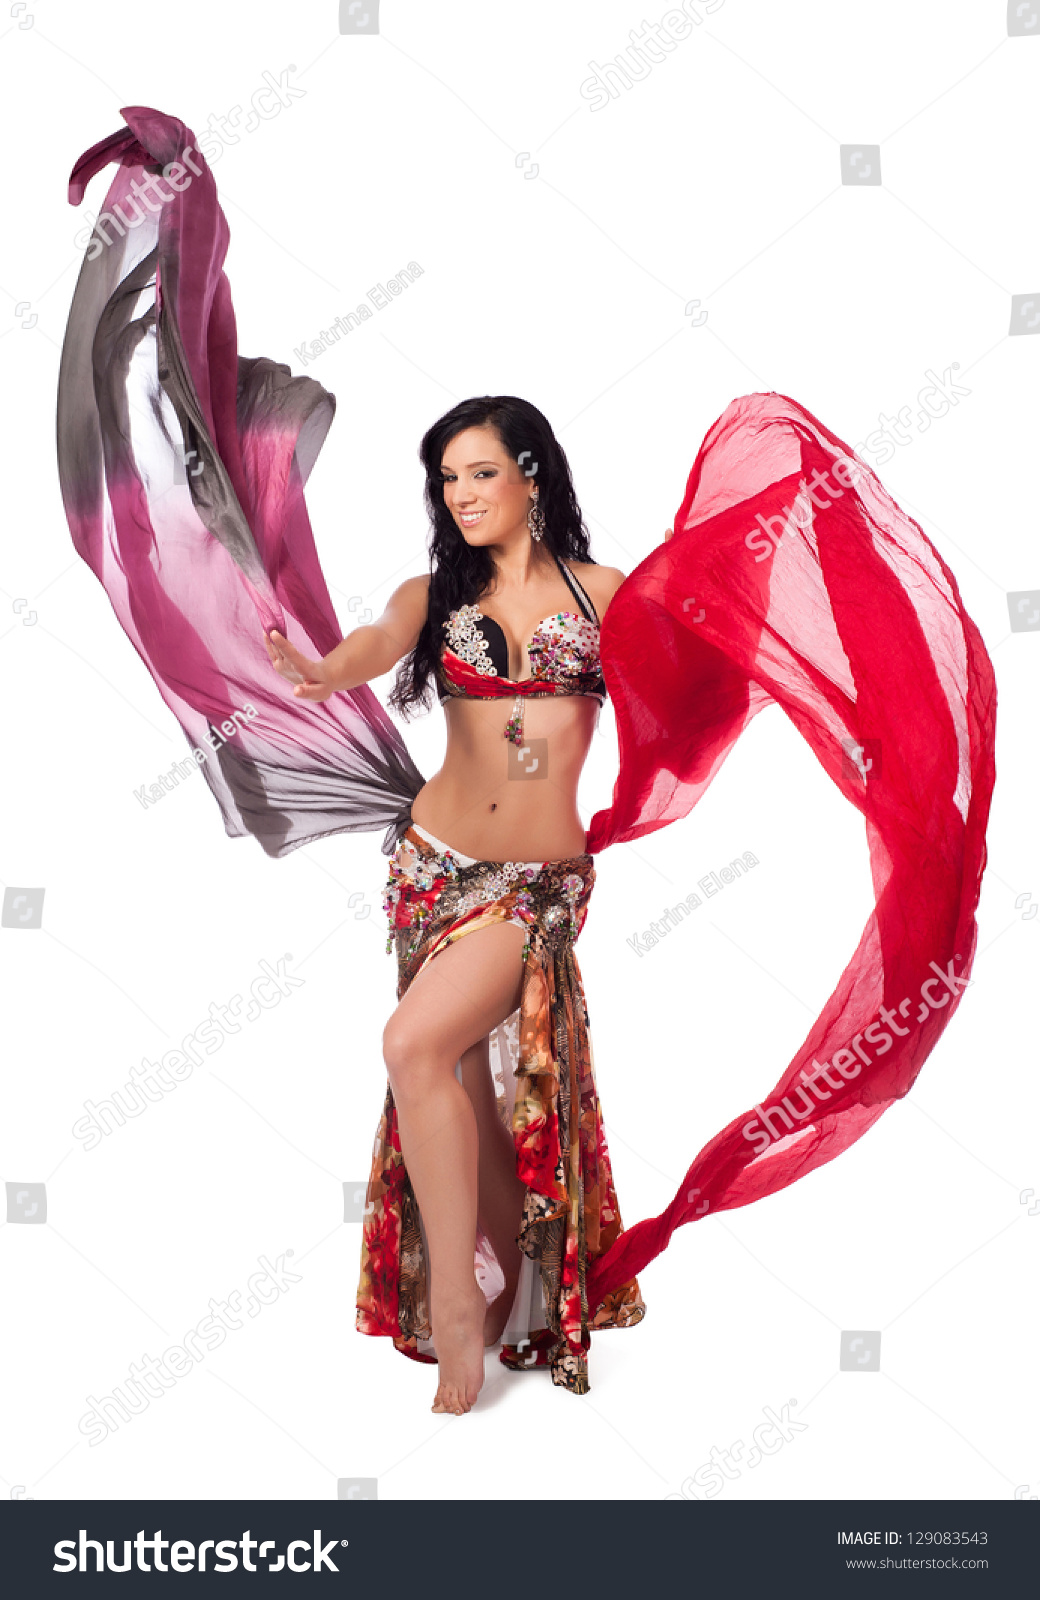 A Beautiful Bellydancer In A Multicolor Costume Smiles As She Dances With Two Colorful Flowing